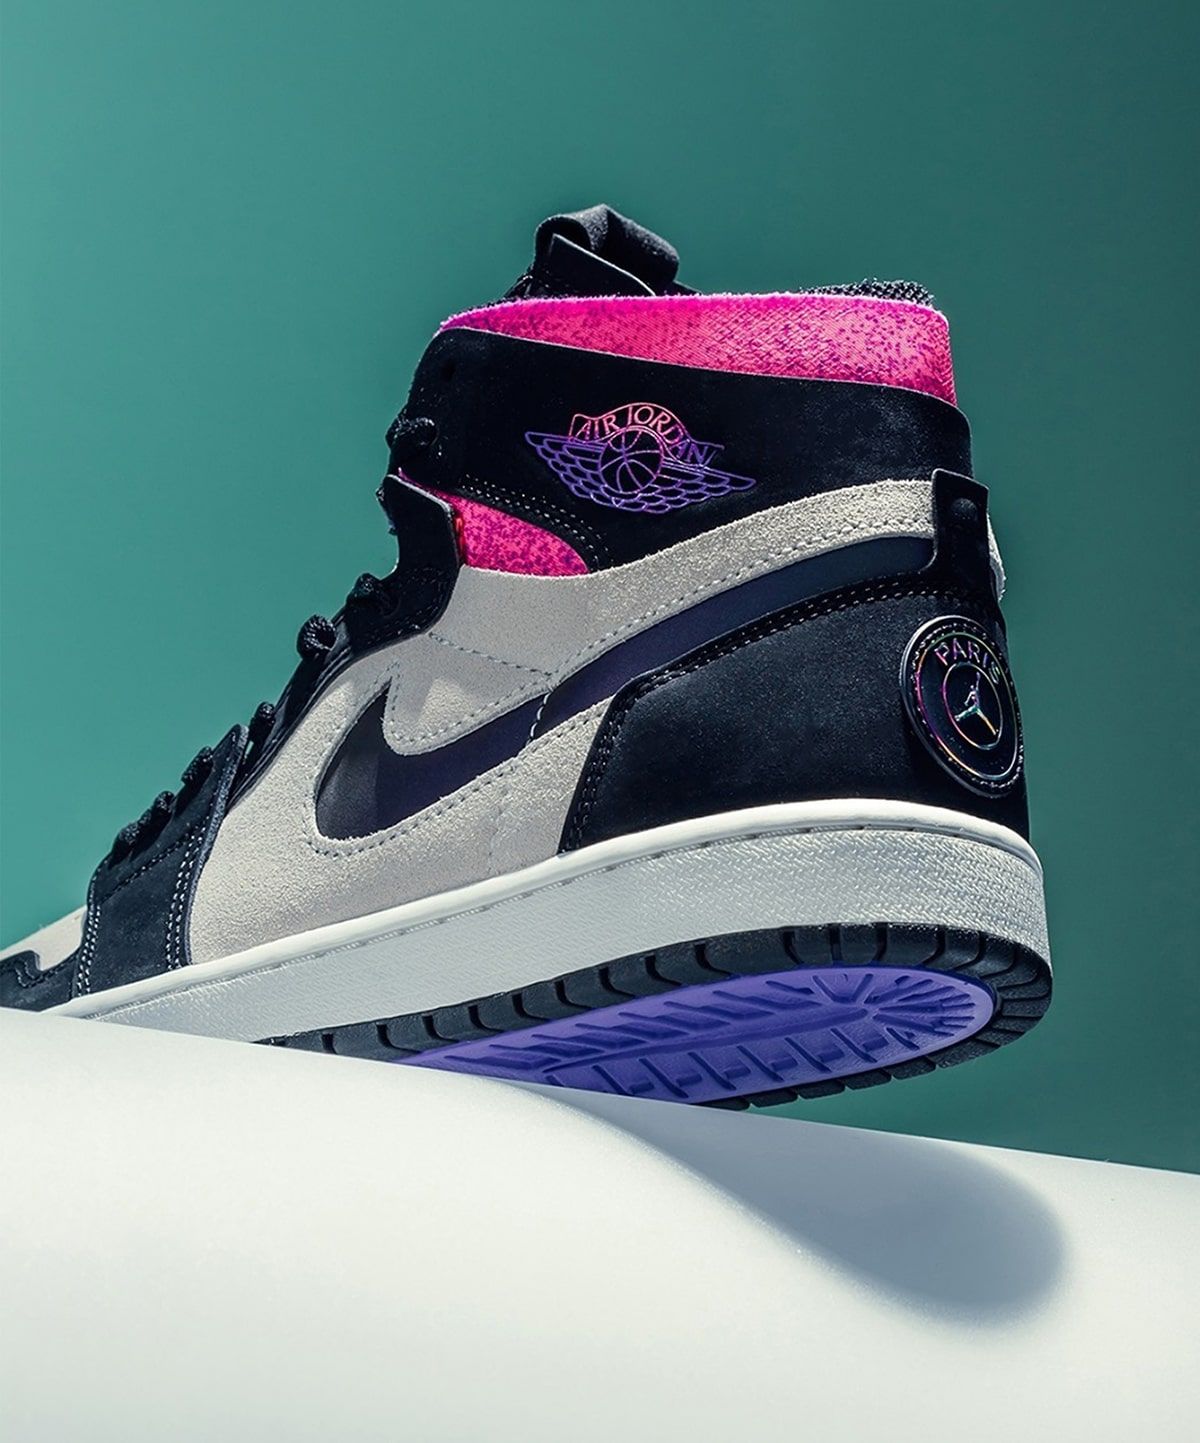 Where to Buy the Air Jordan 1 Zoom Comfort “PSG” | House of Heat°